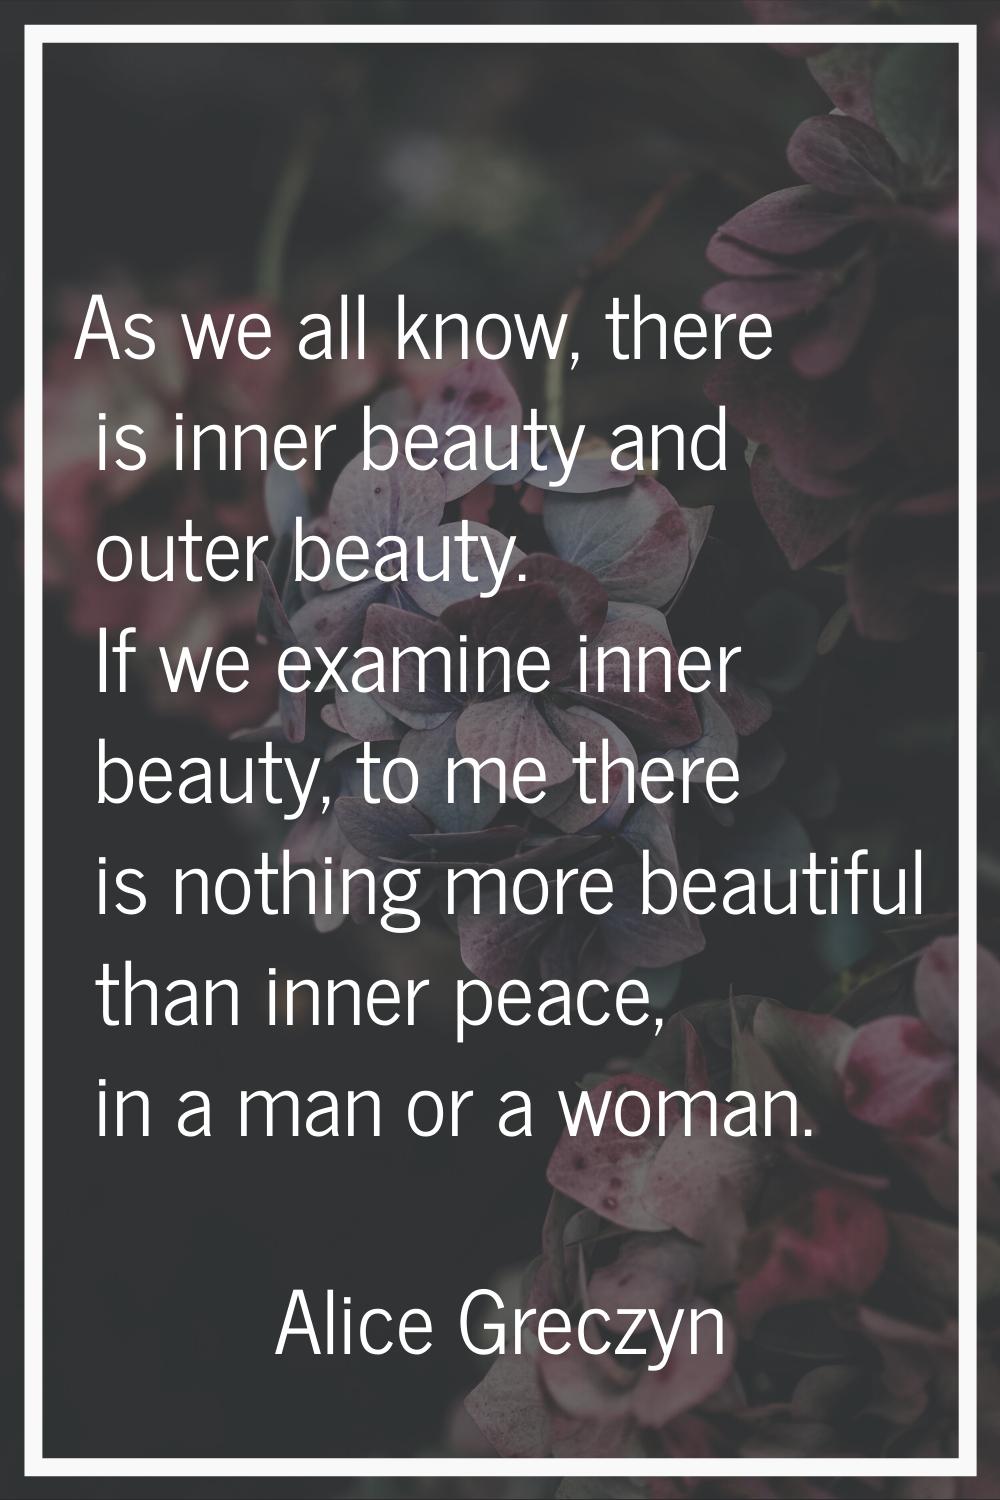 As we all know, there is inner beauty and outer beauty. If we examine inner beauty, to me there is 